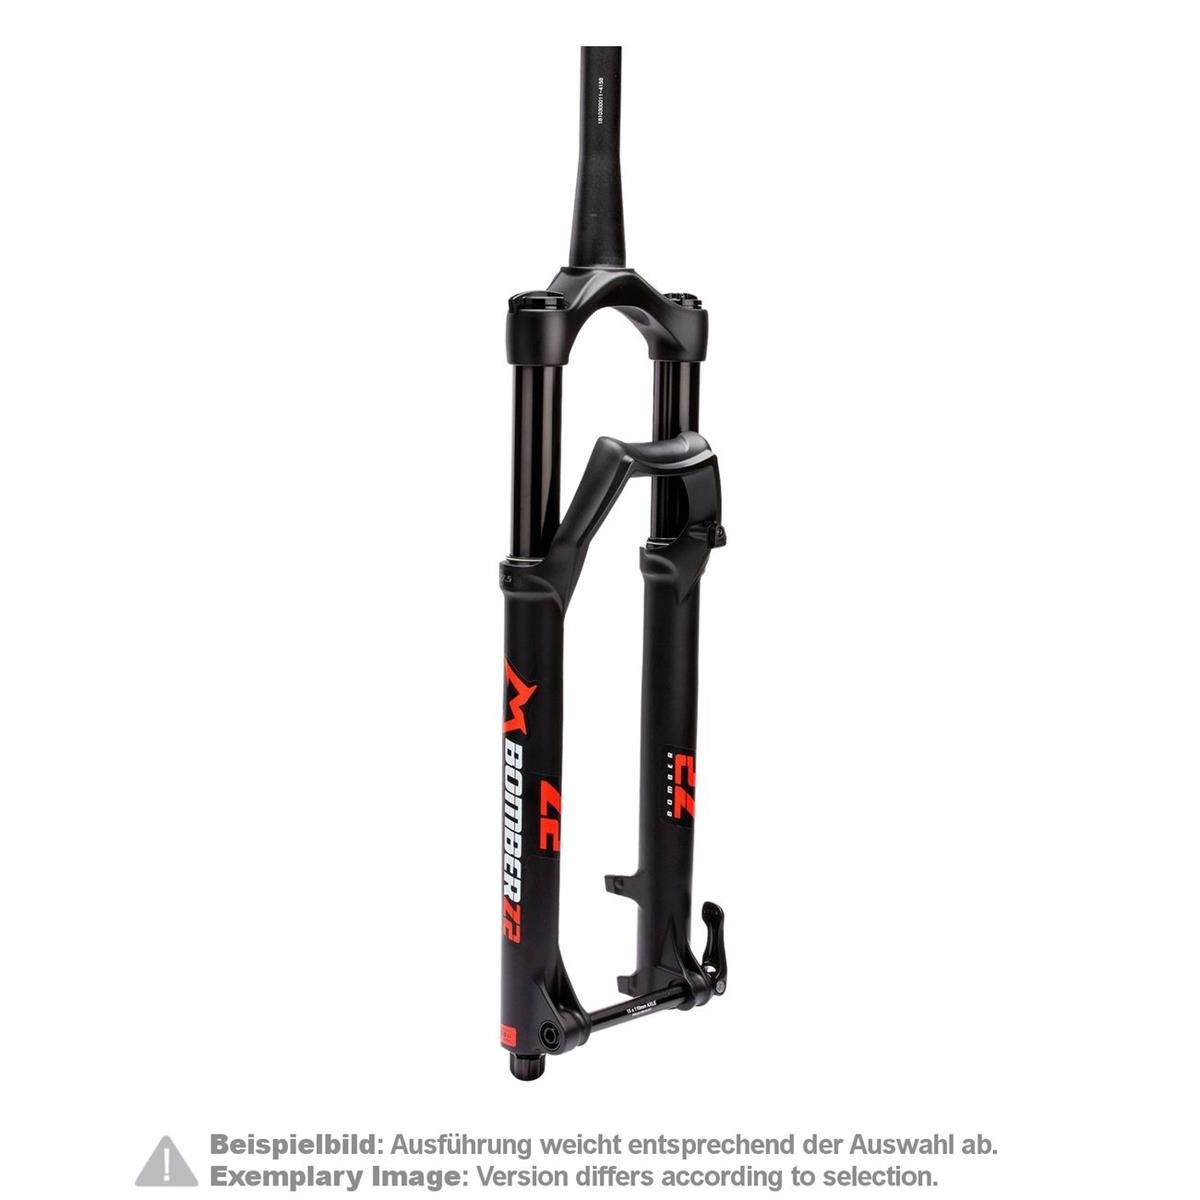 Marzocchi Suspension Fork Bomber Z2 27.5 Inches, 15x110 mm, RAIL, 44 mm Offset, 150 mm